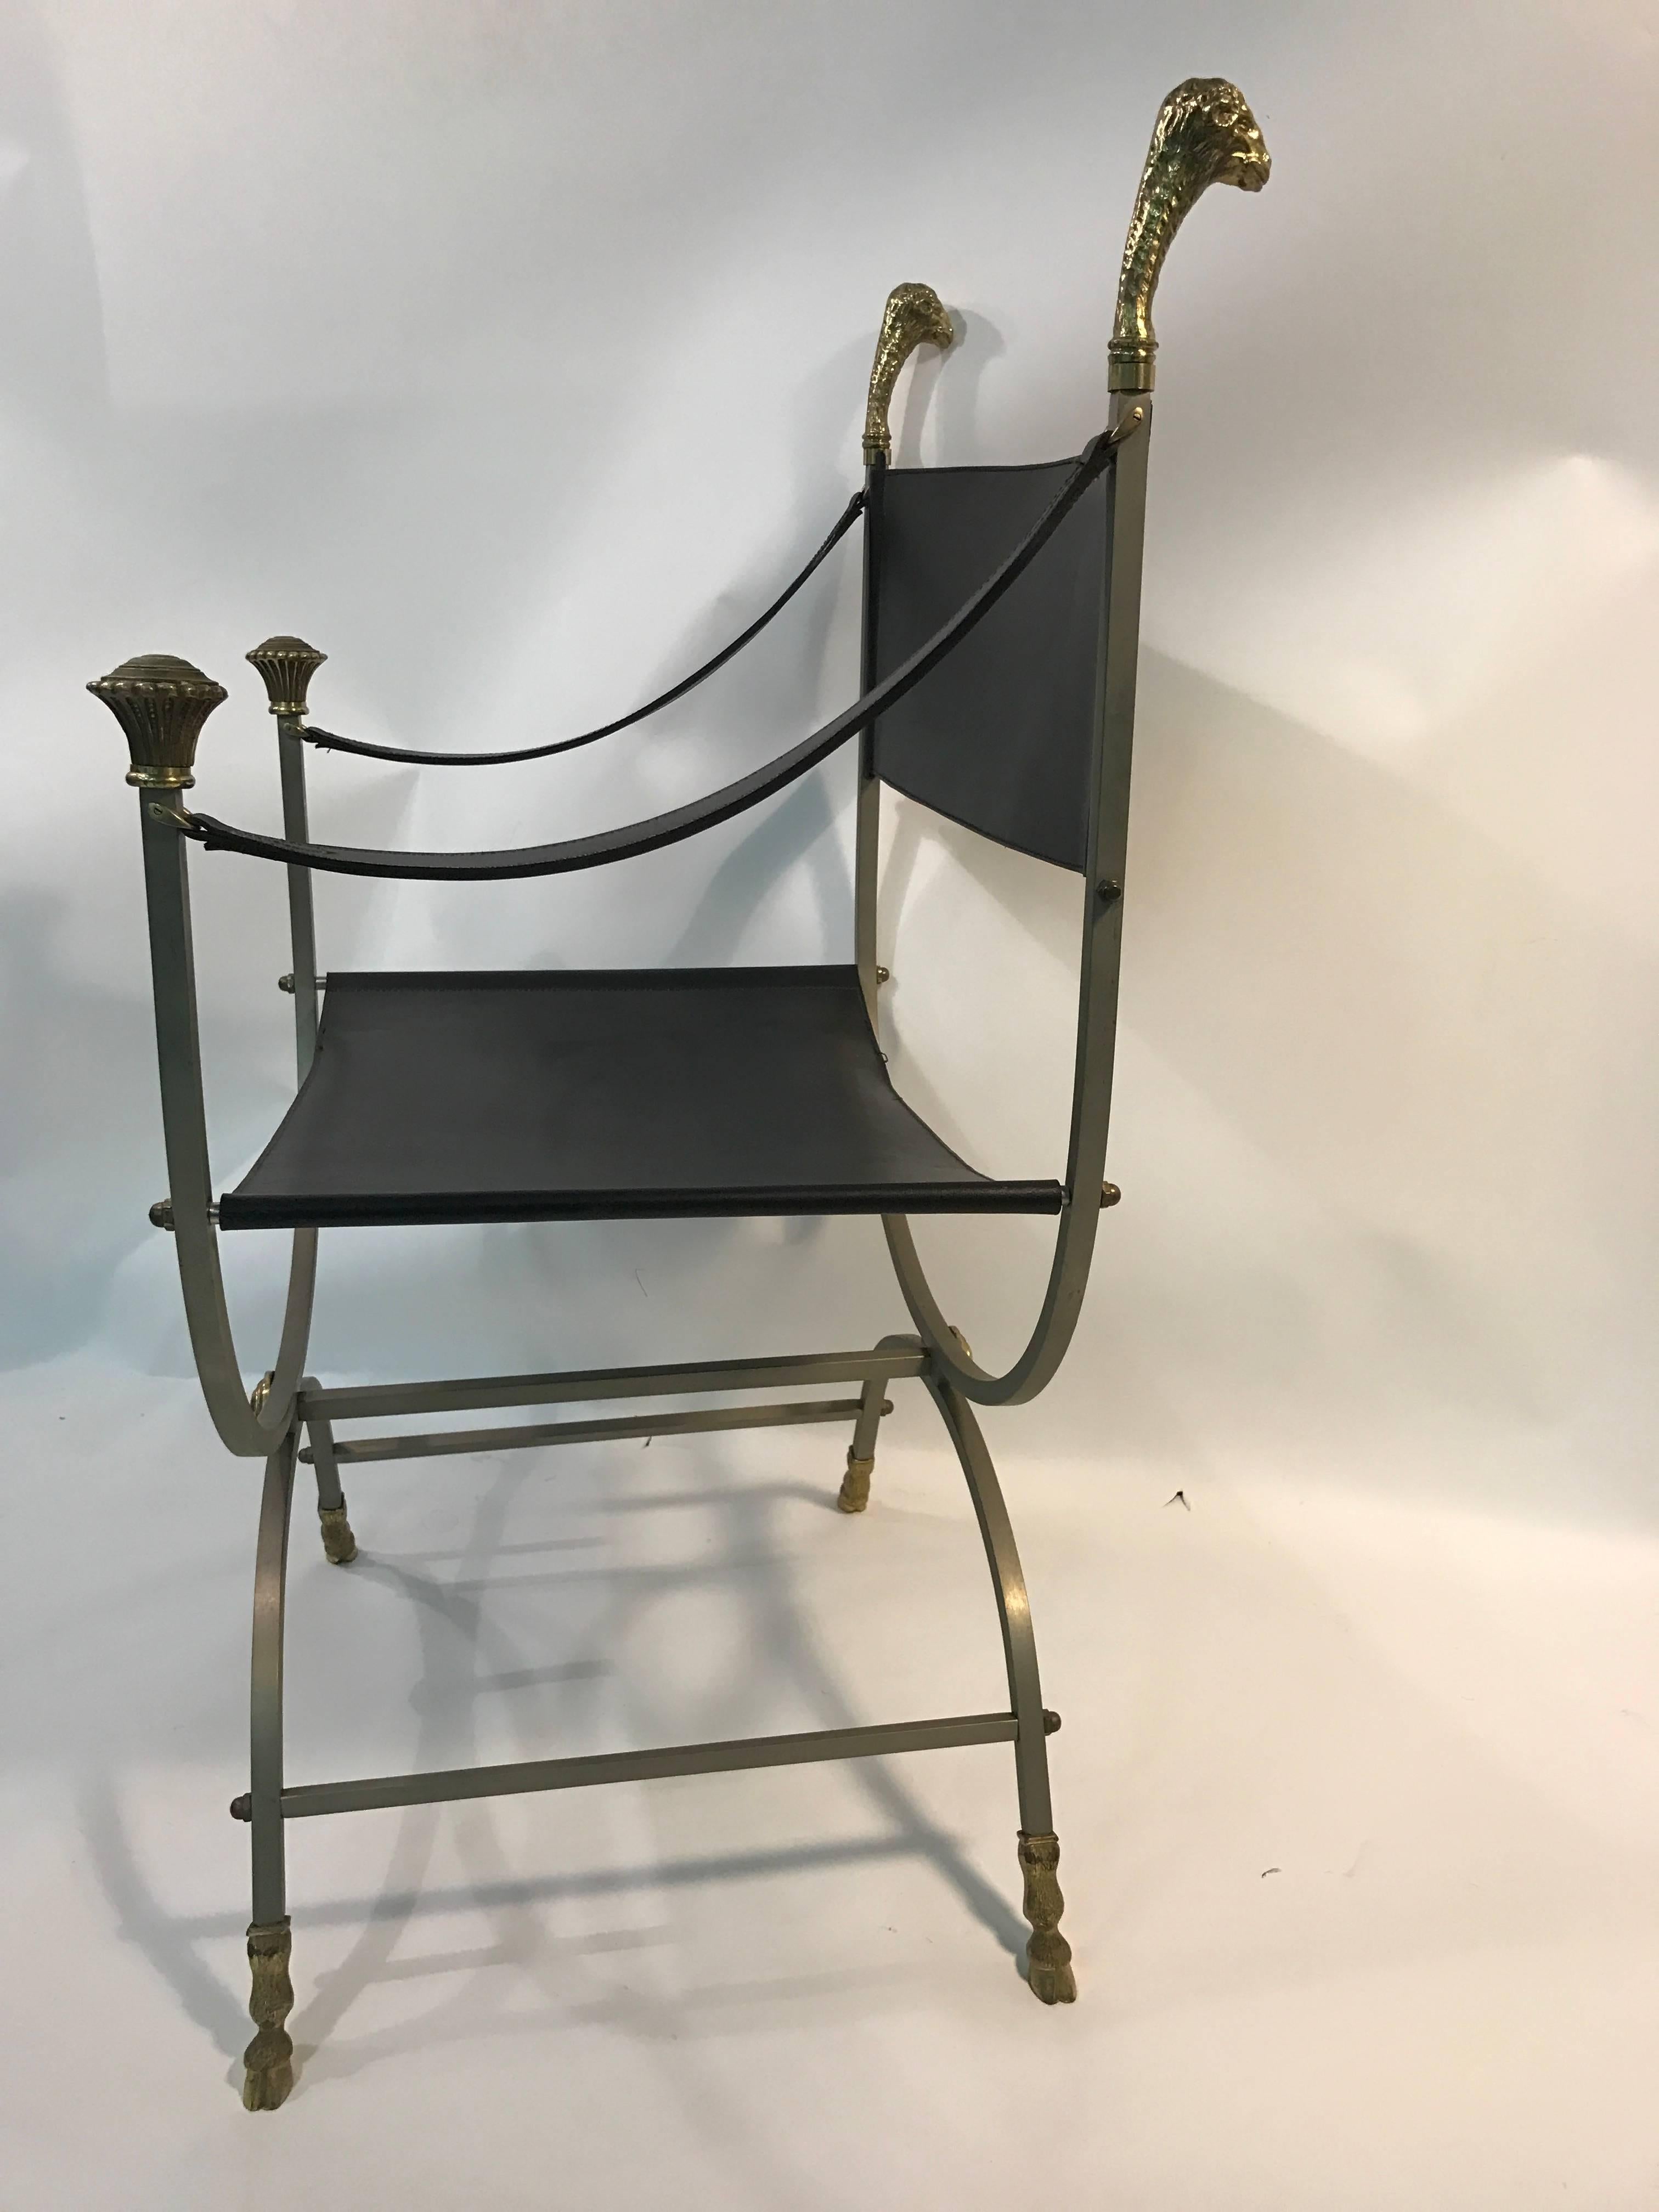 Striking steel and black leather chair with sculpted brass ram's head finials and hooves by Maison Jansen, circa 1960. Good vintage condition with some wear underneath the seat.